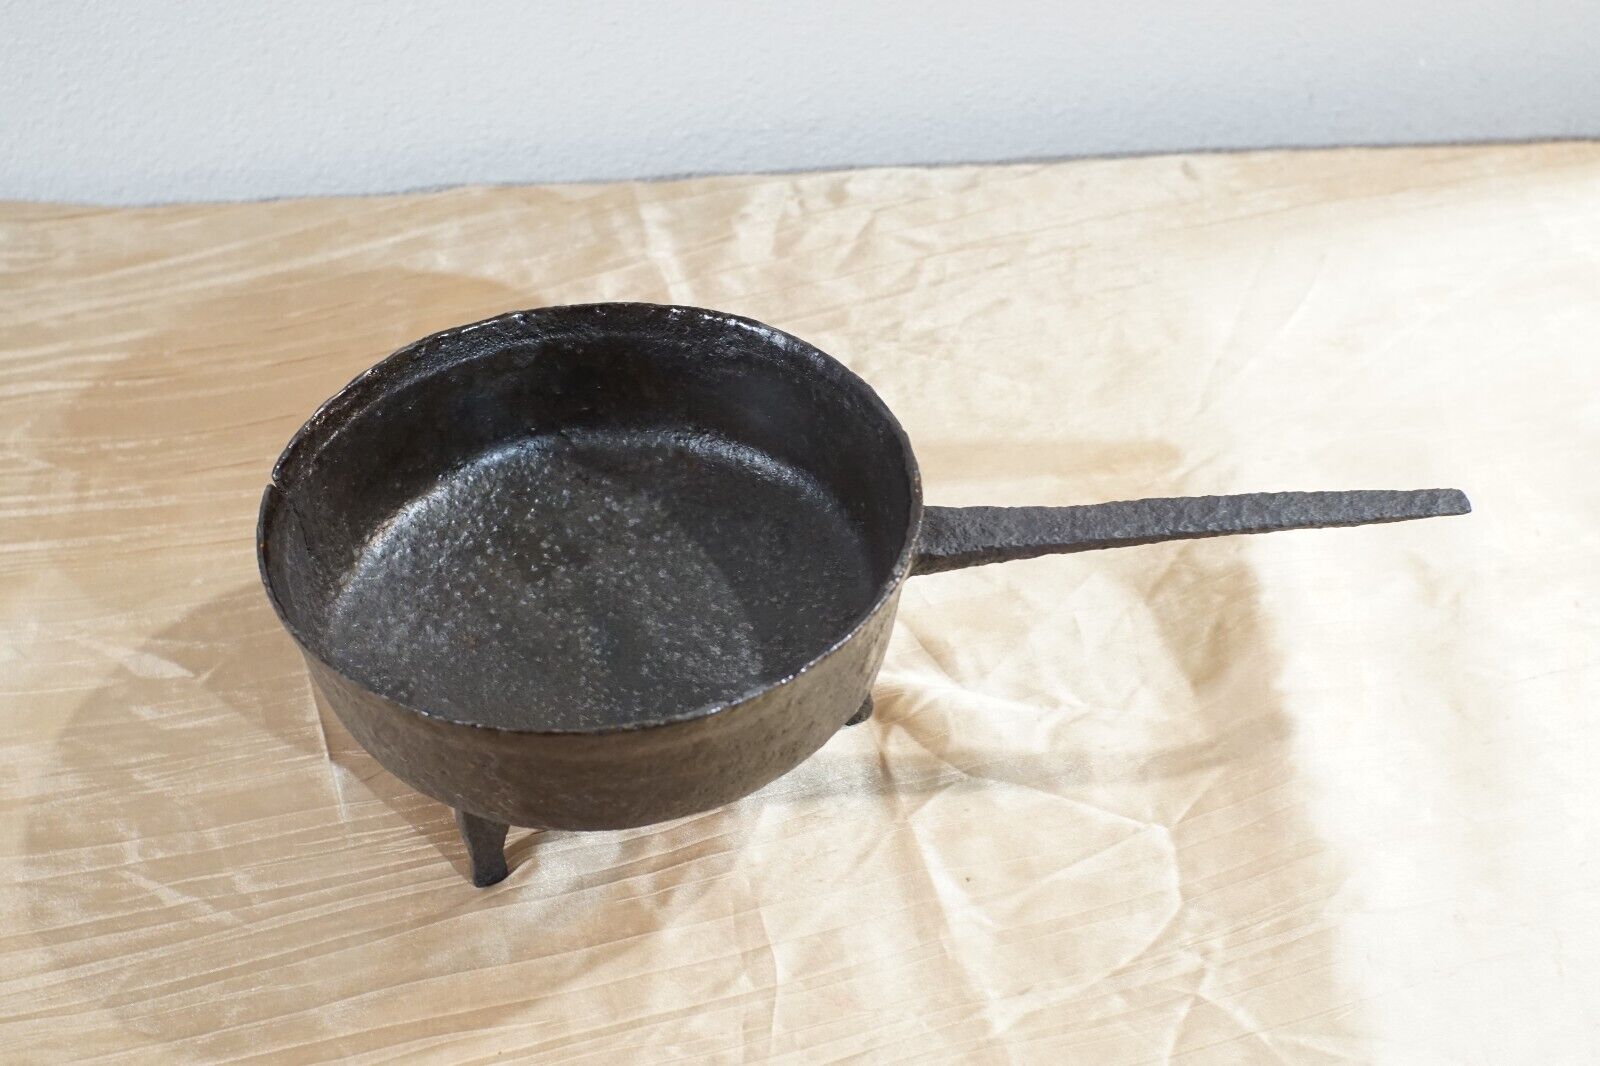 19th c 3-legged Spider Cast Iron Skillet with Gate Mark